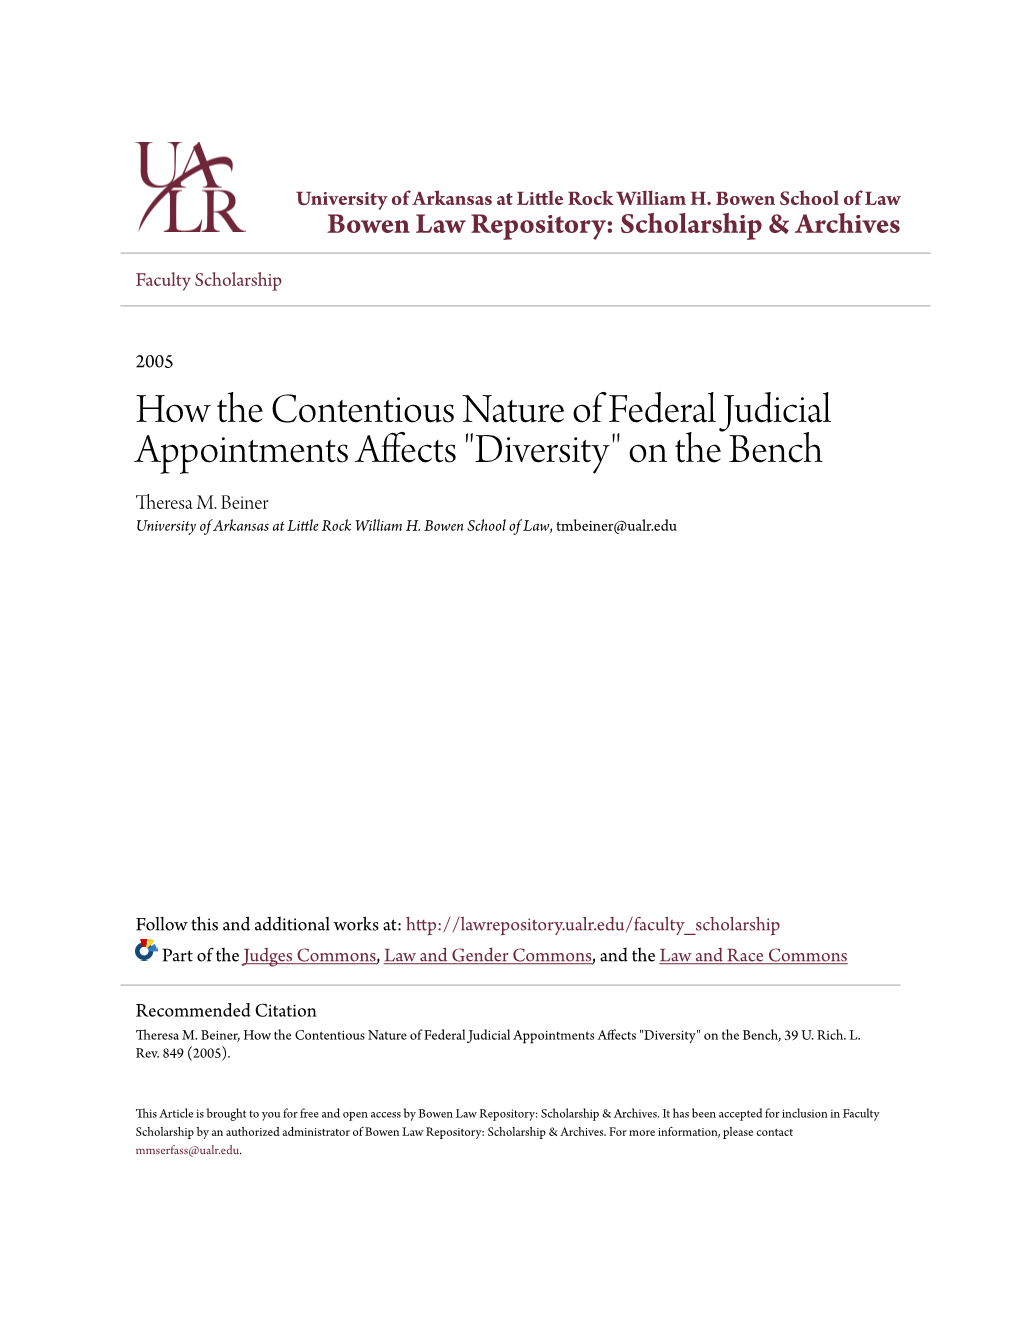 How the Contentious Nature of Federal Judicial Appointments Affects "Diversity" on the Bench Theresa M